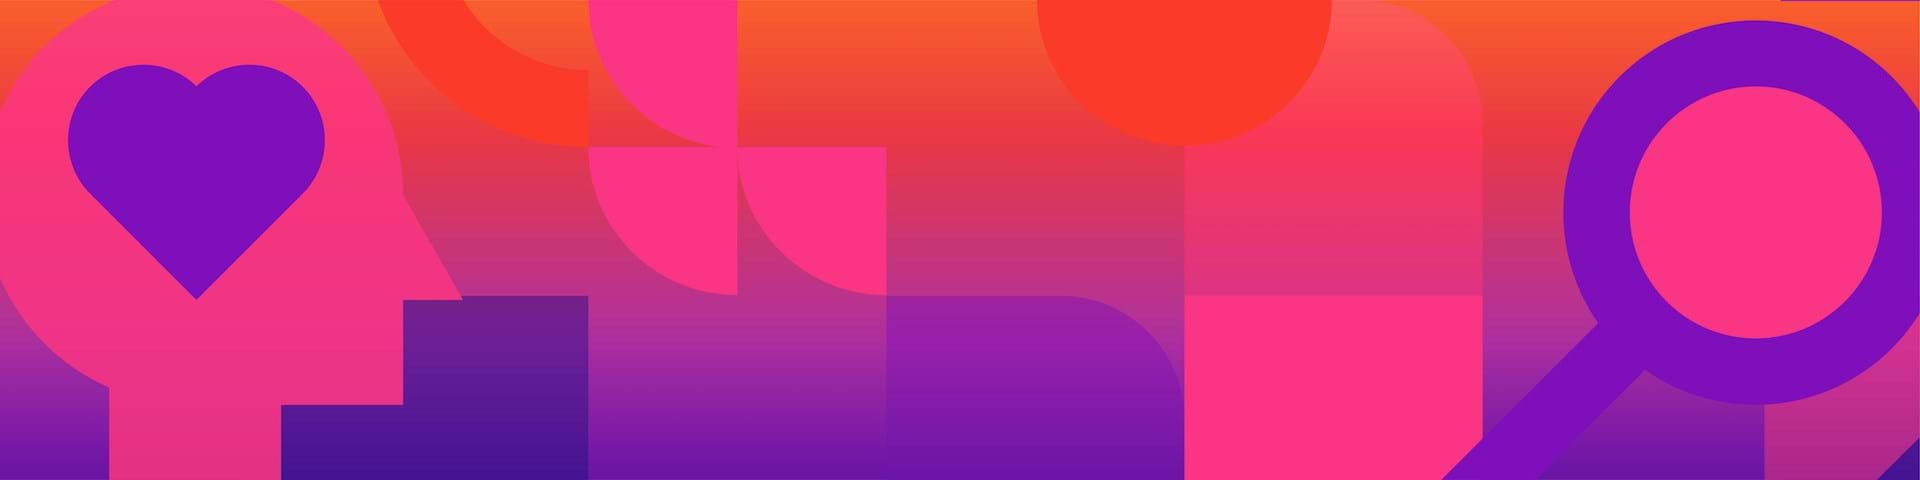 Colorful abstract shapes from Rethinking the Purpose and Meaning of Leadership communications whitepaper